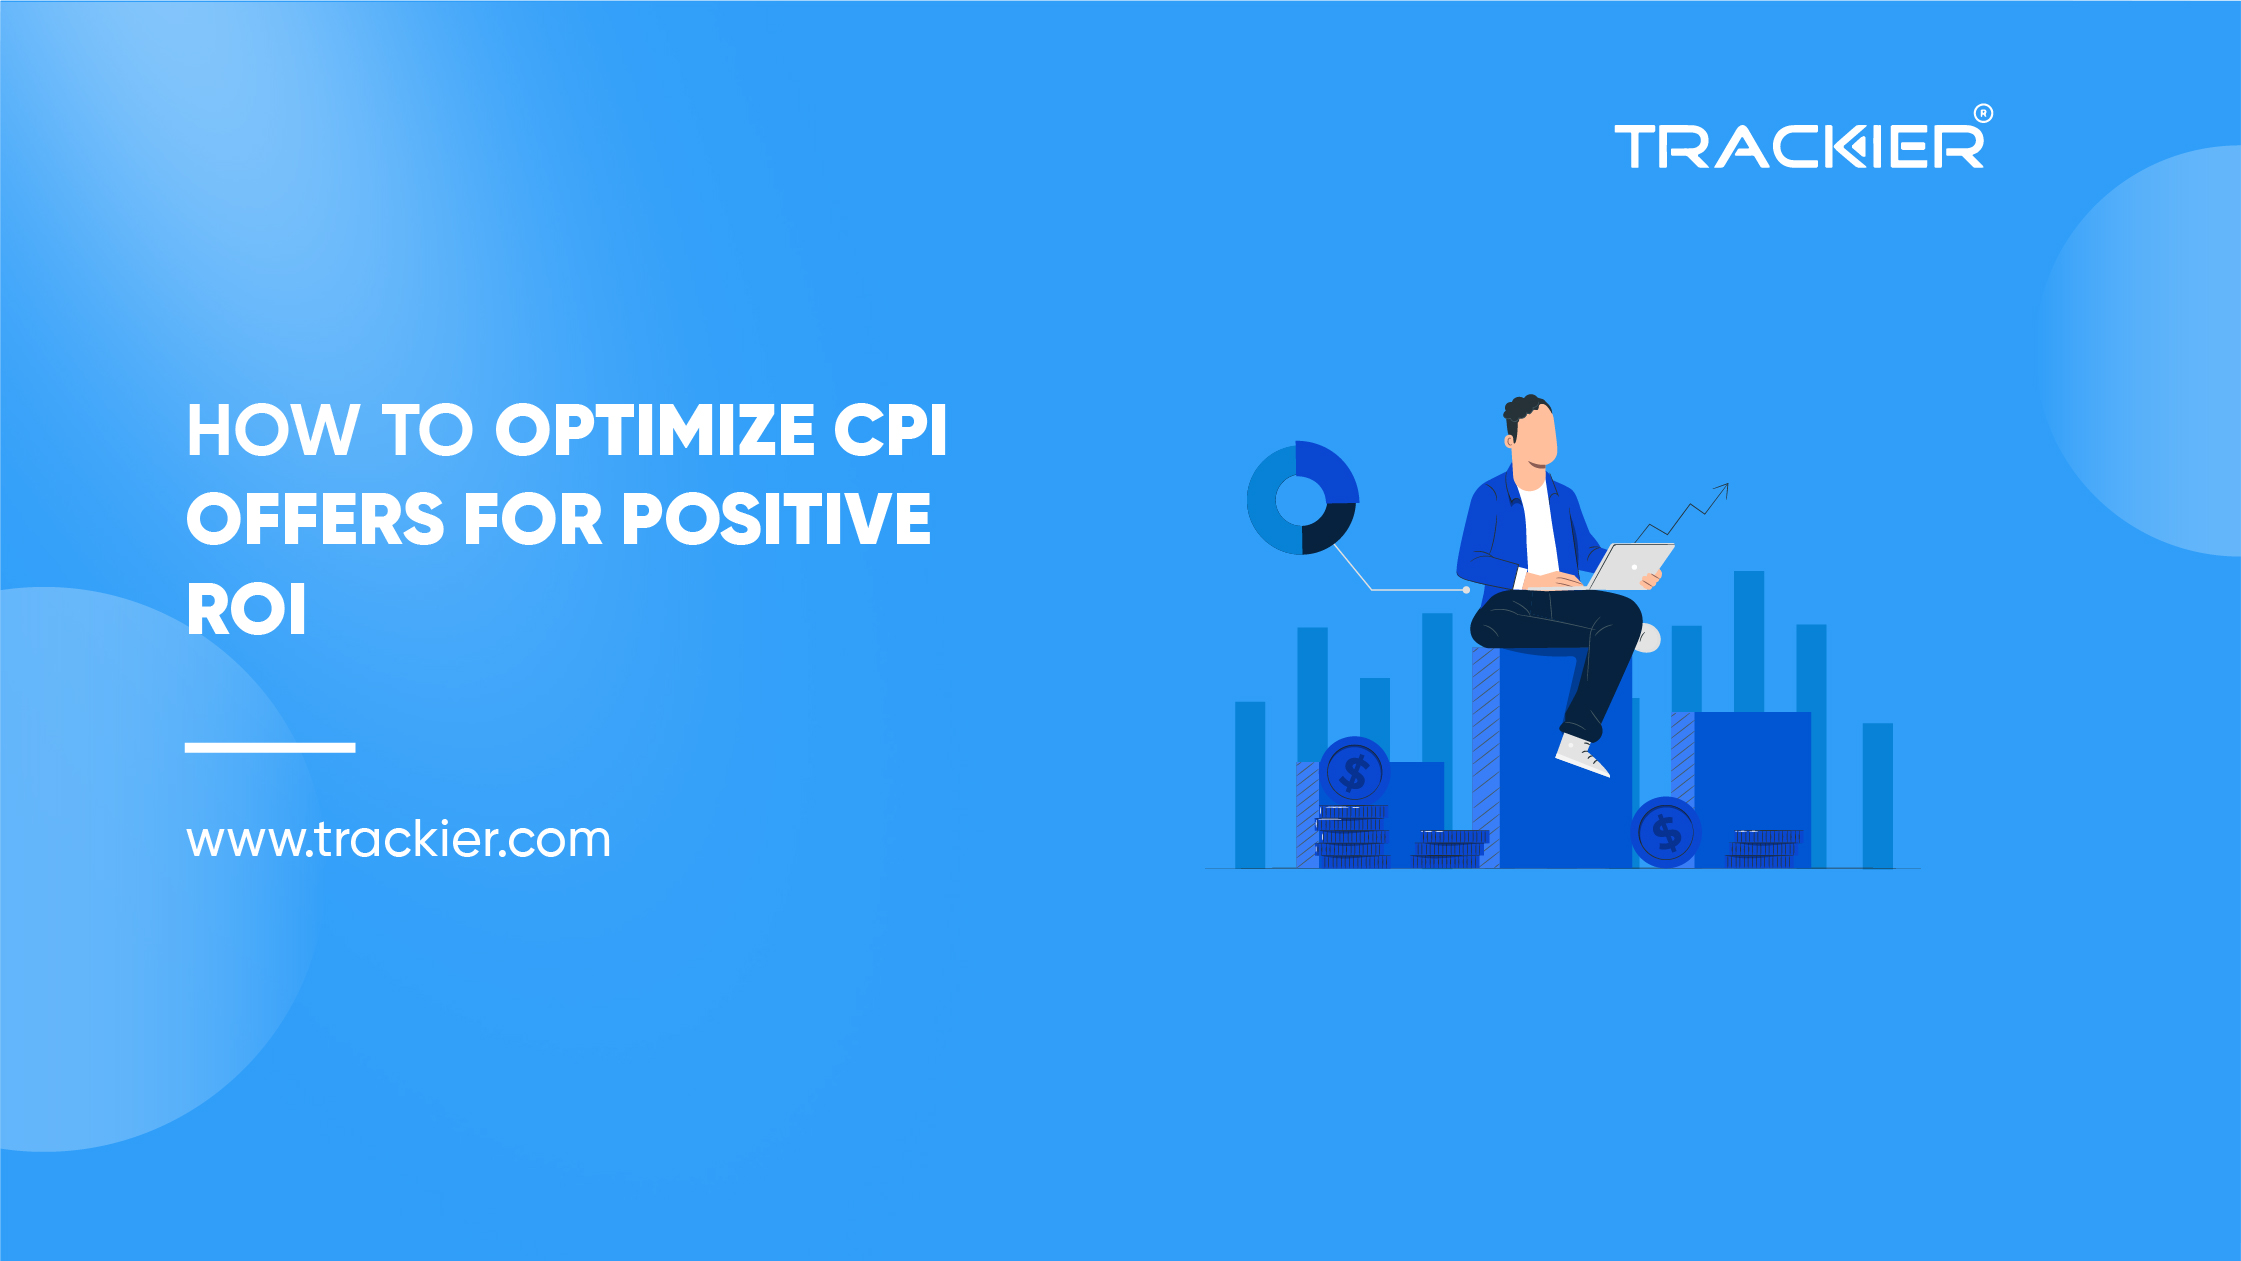 How To Optimize CPI For ROI